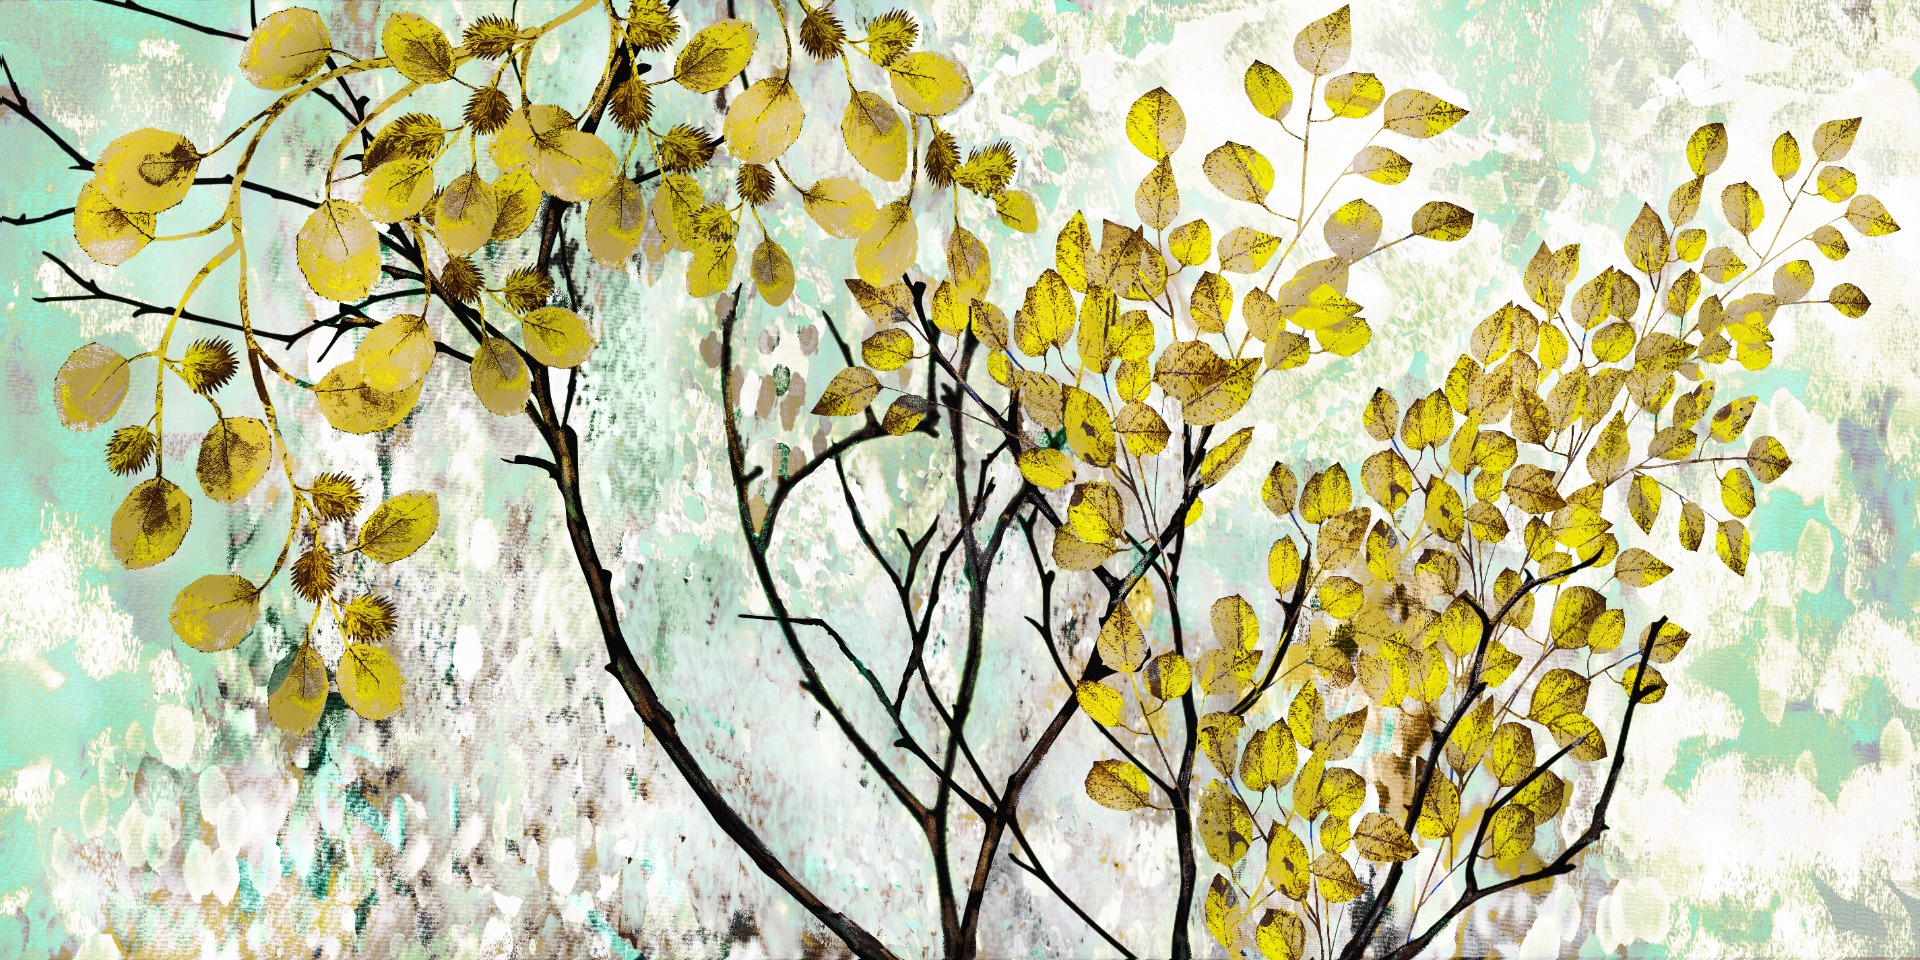 Wall mural Royal Garden curry yellow | Wallpaper from the 70s